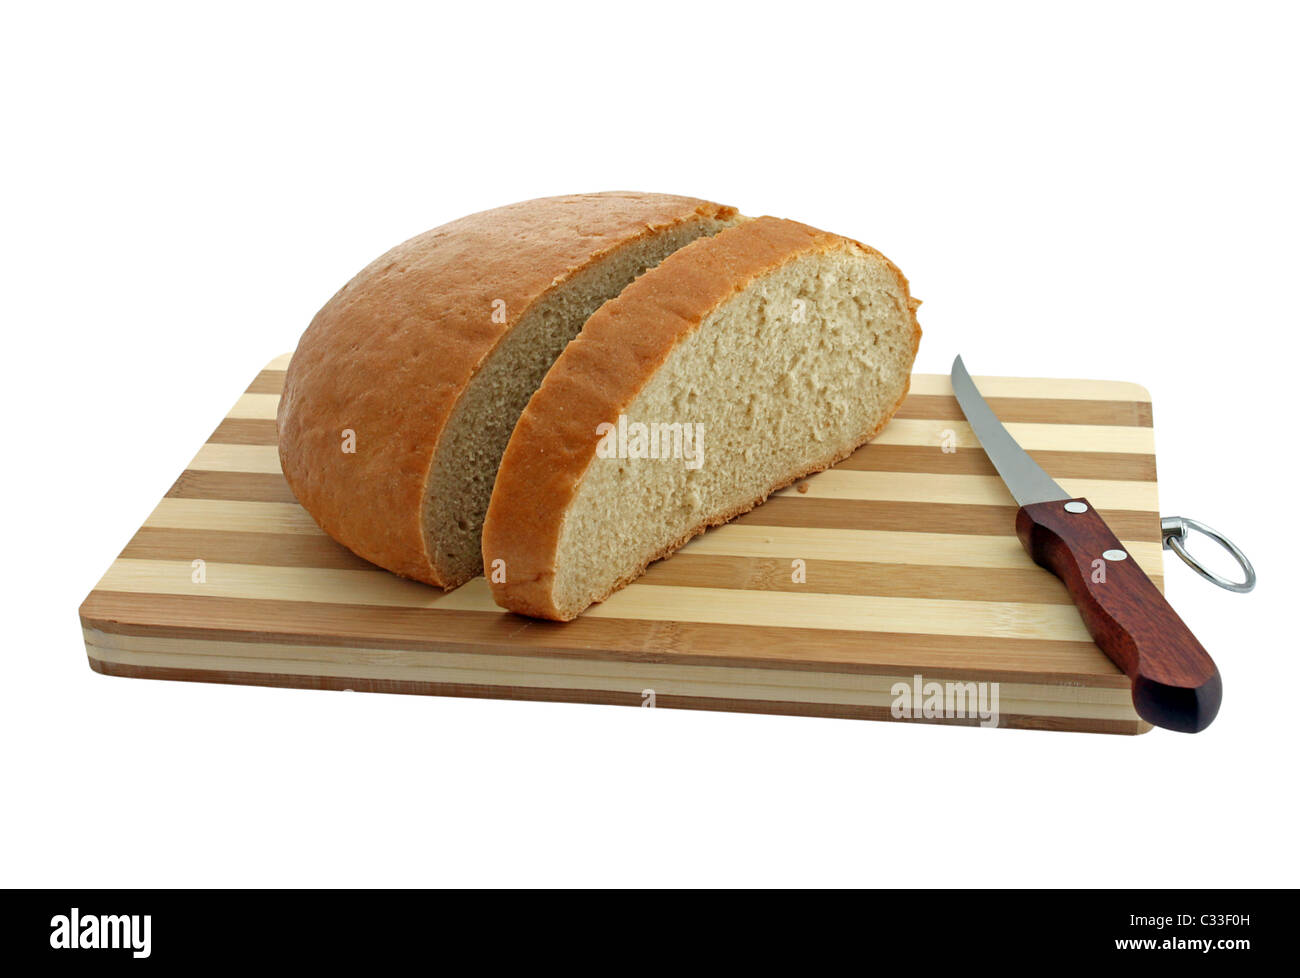 loaf of bread and knife on a cutting board Stock Photo